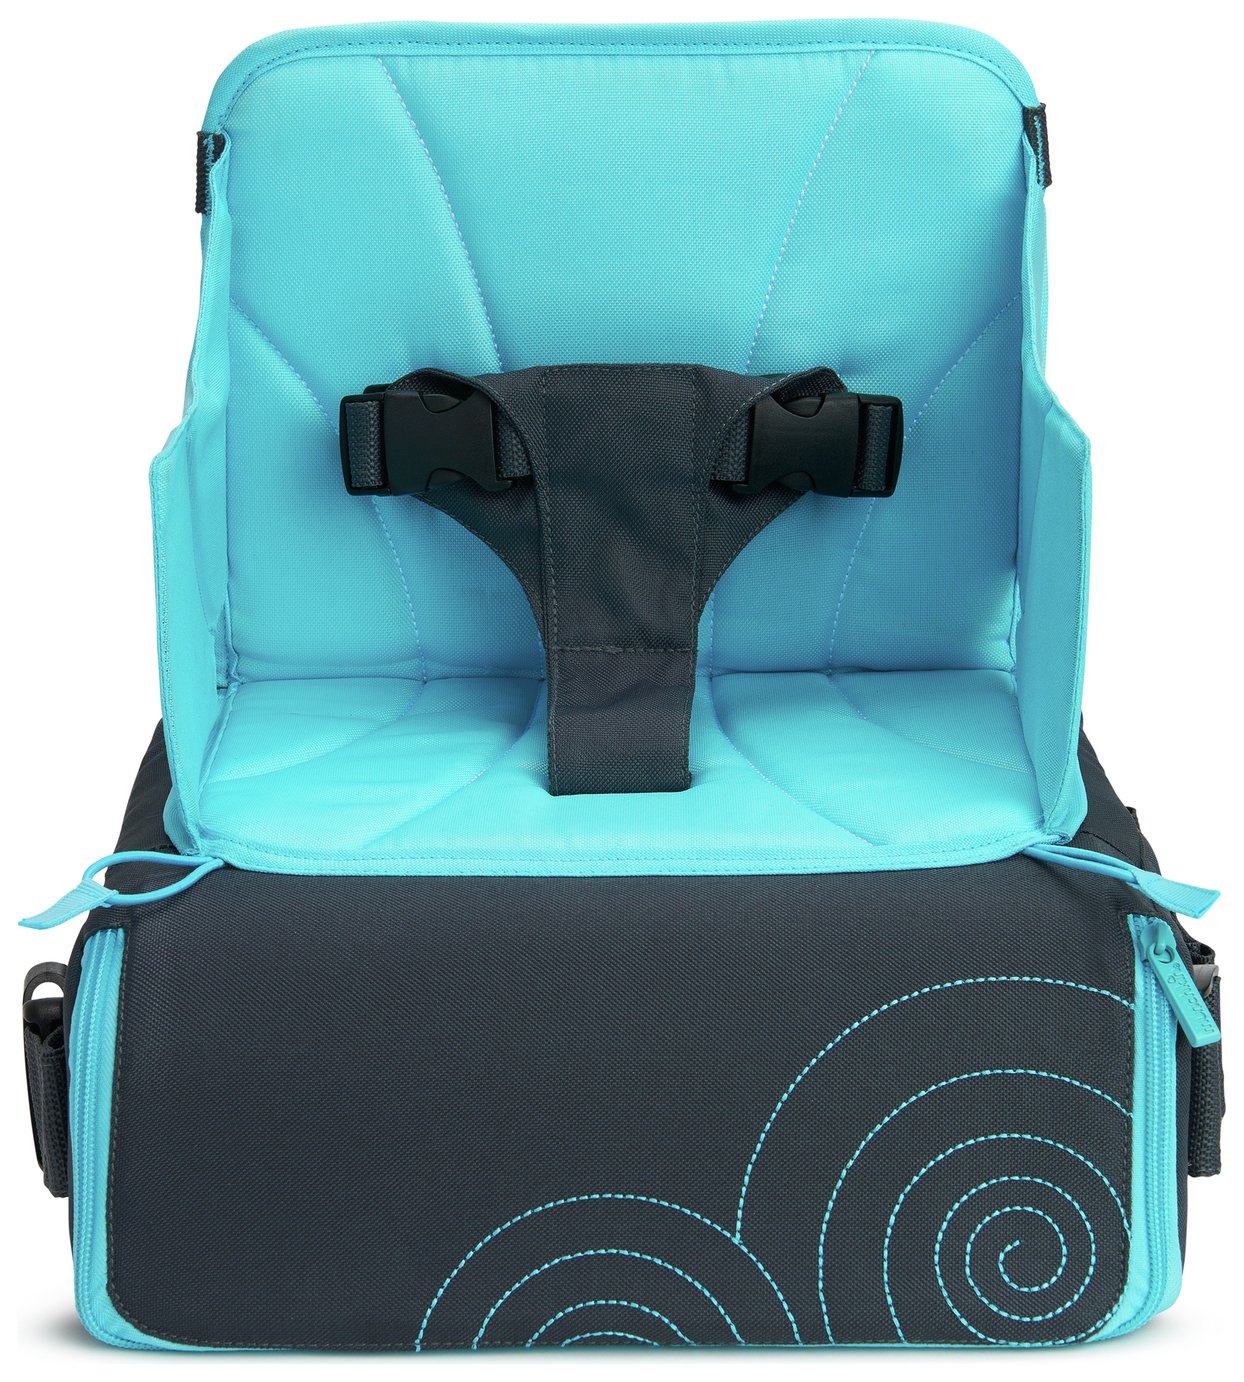 Munchkin Travel Child Booster Seat Review